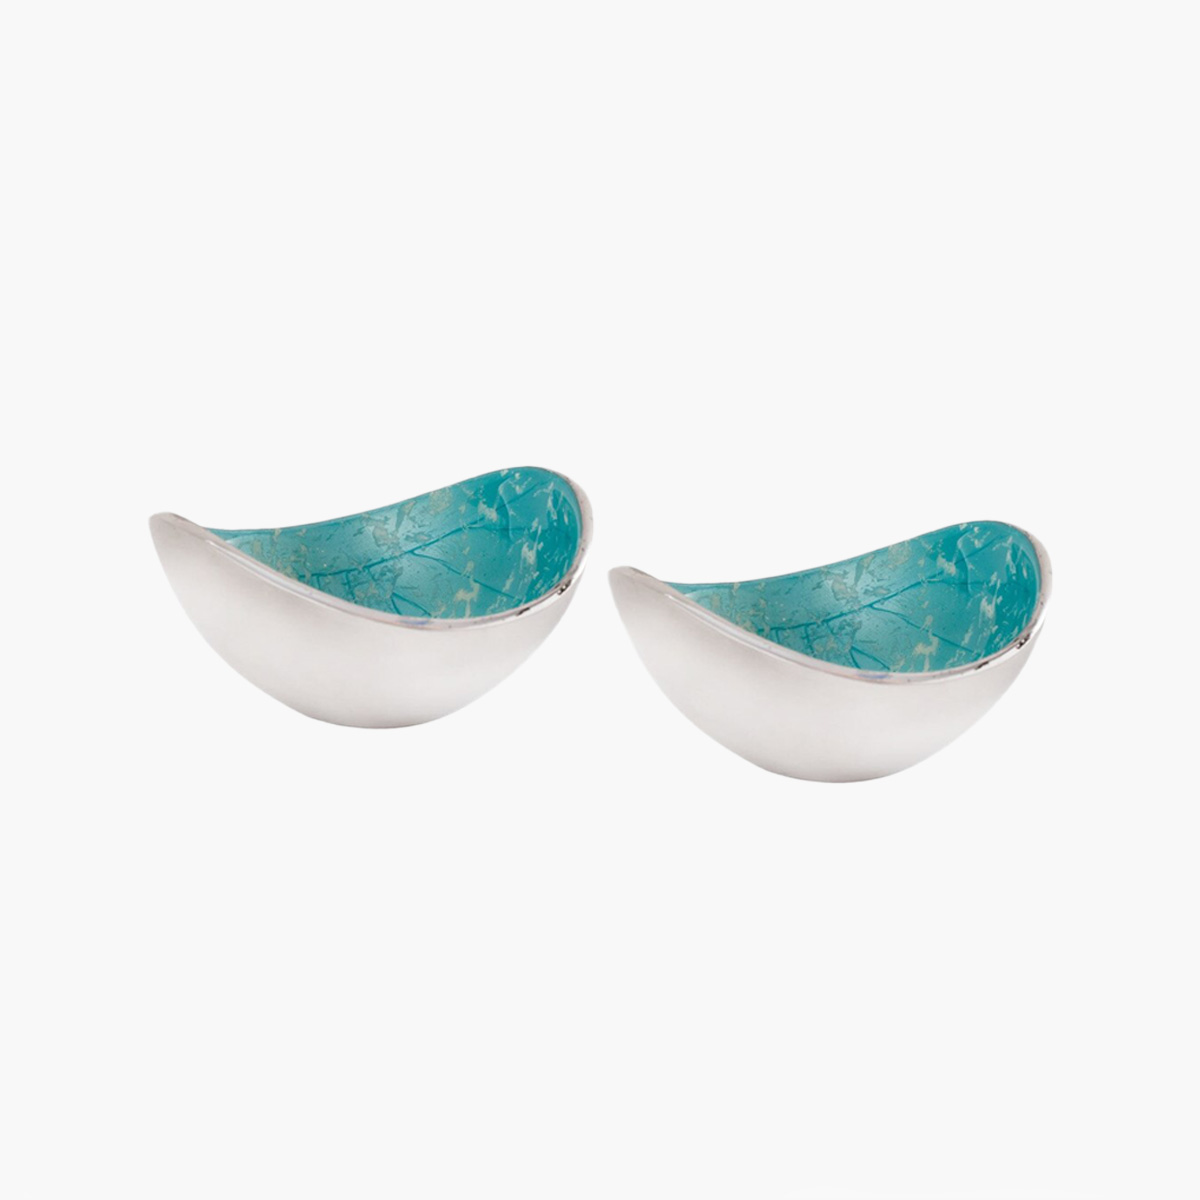 Two blue and white Laguna small bowls.